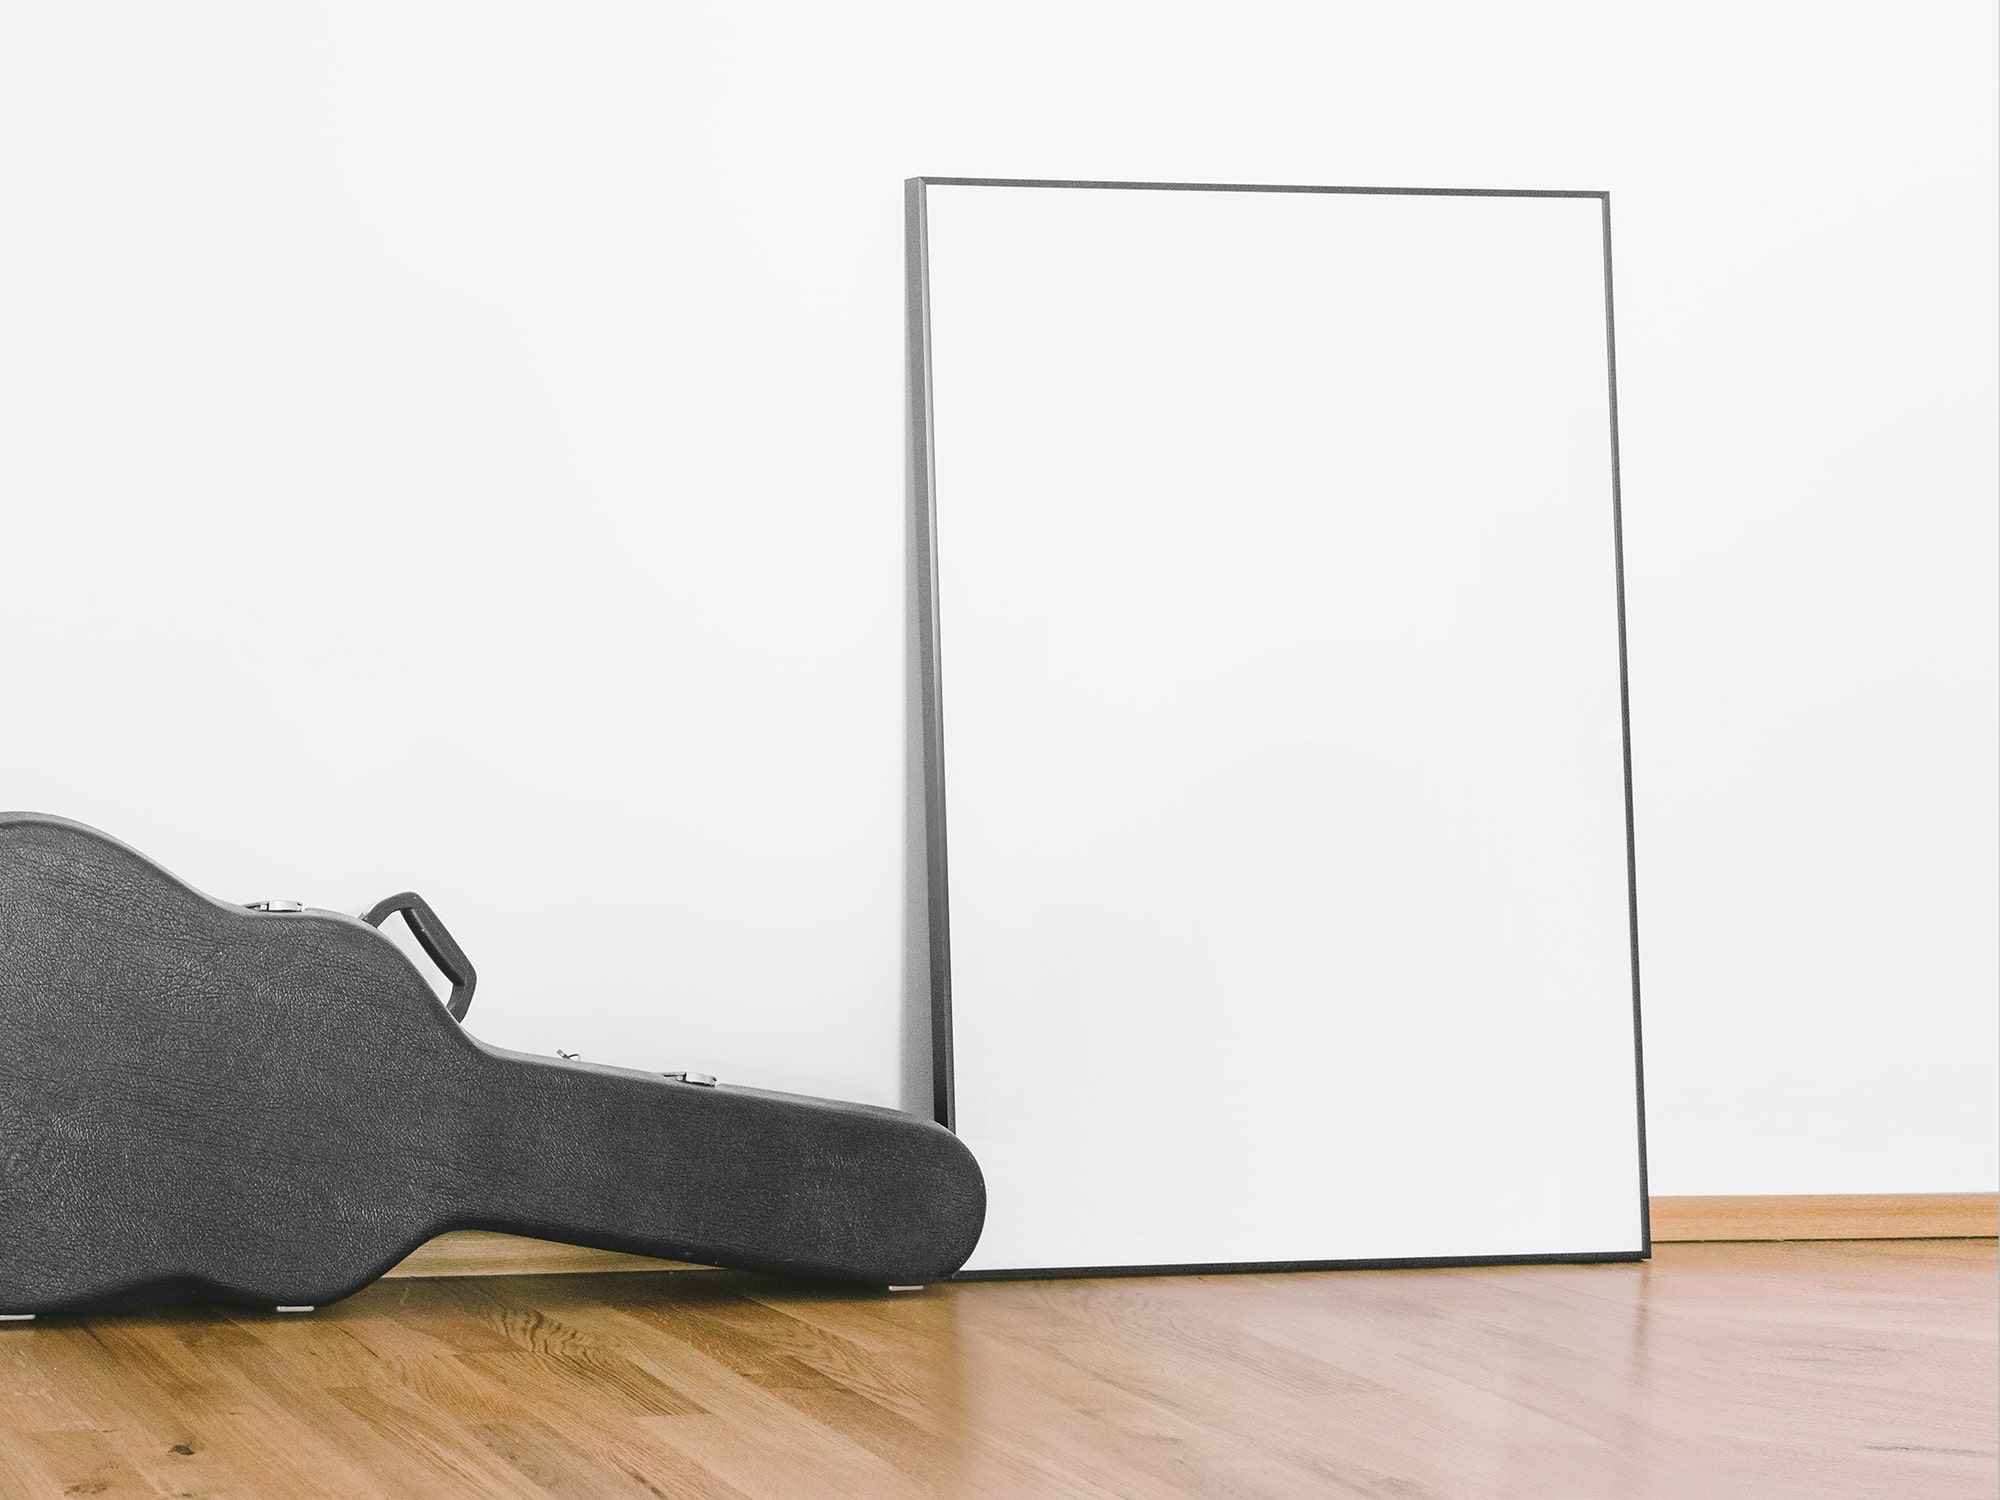 Download Poster and Guitar Case Mockup | The Mockup Club